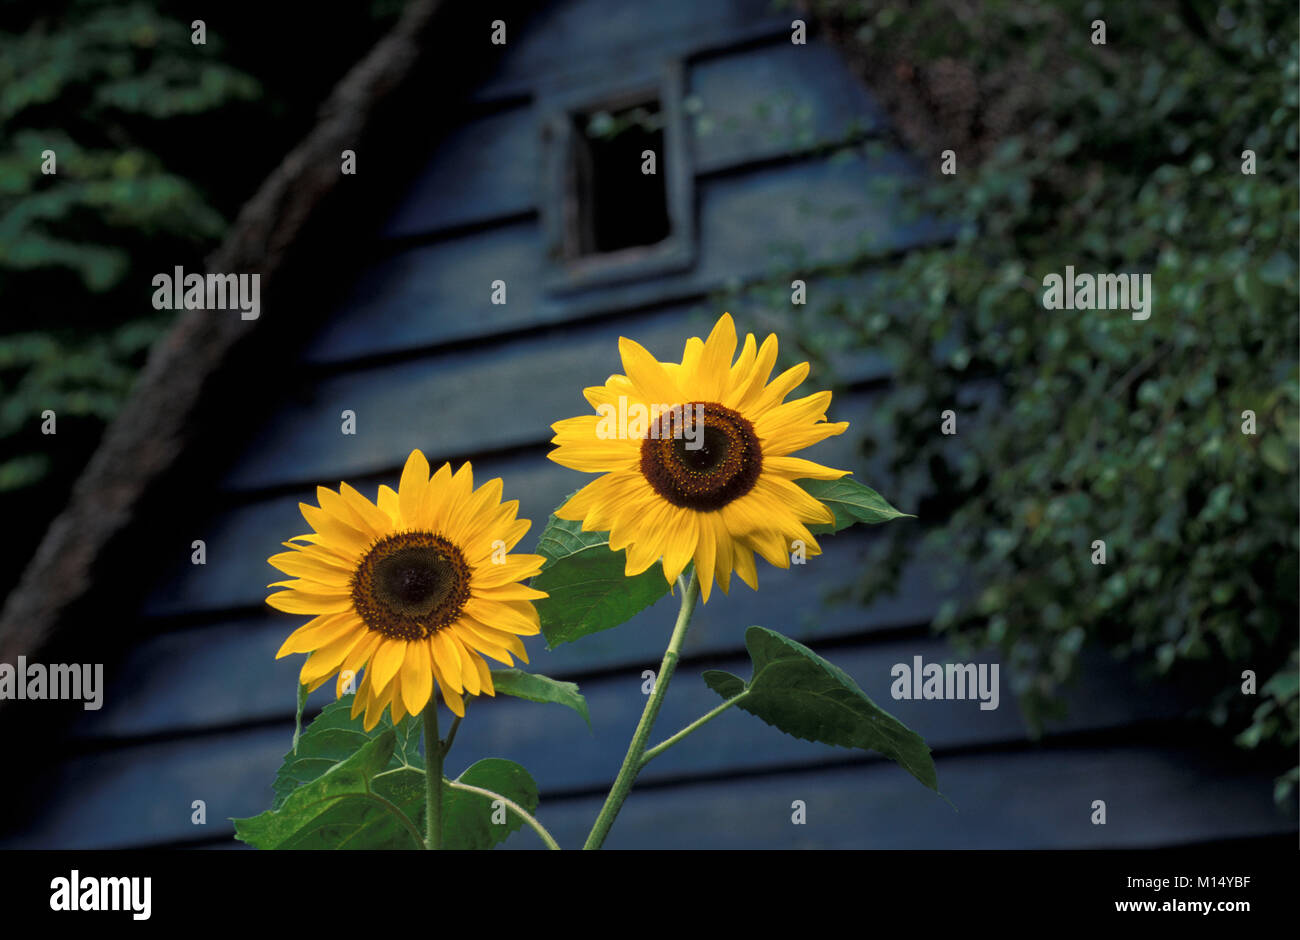 The Netherlands. 's-Graveland. Sunflowers in front of old shed. Stock Photo